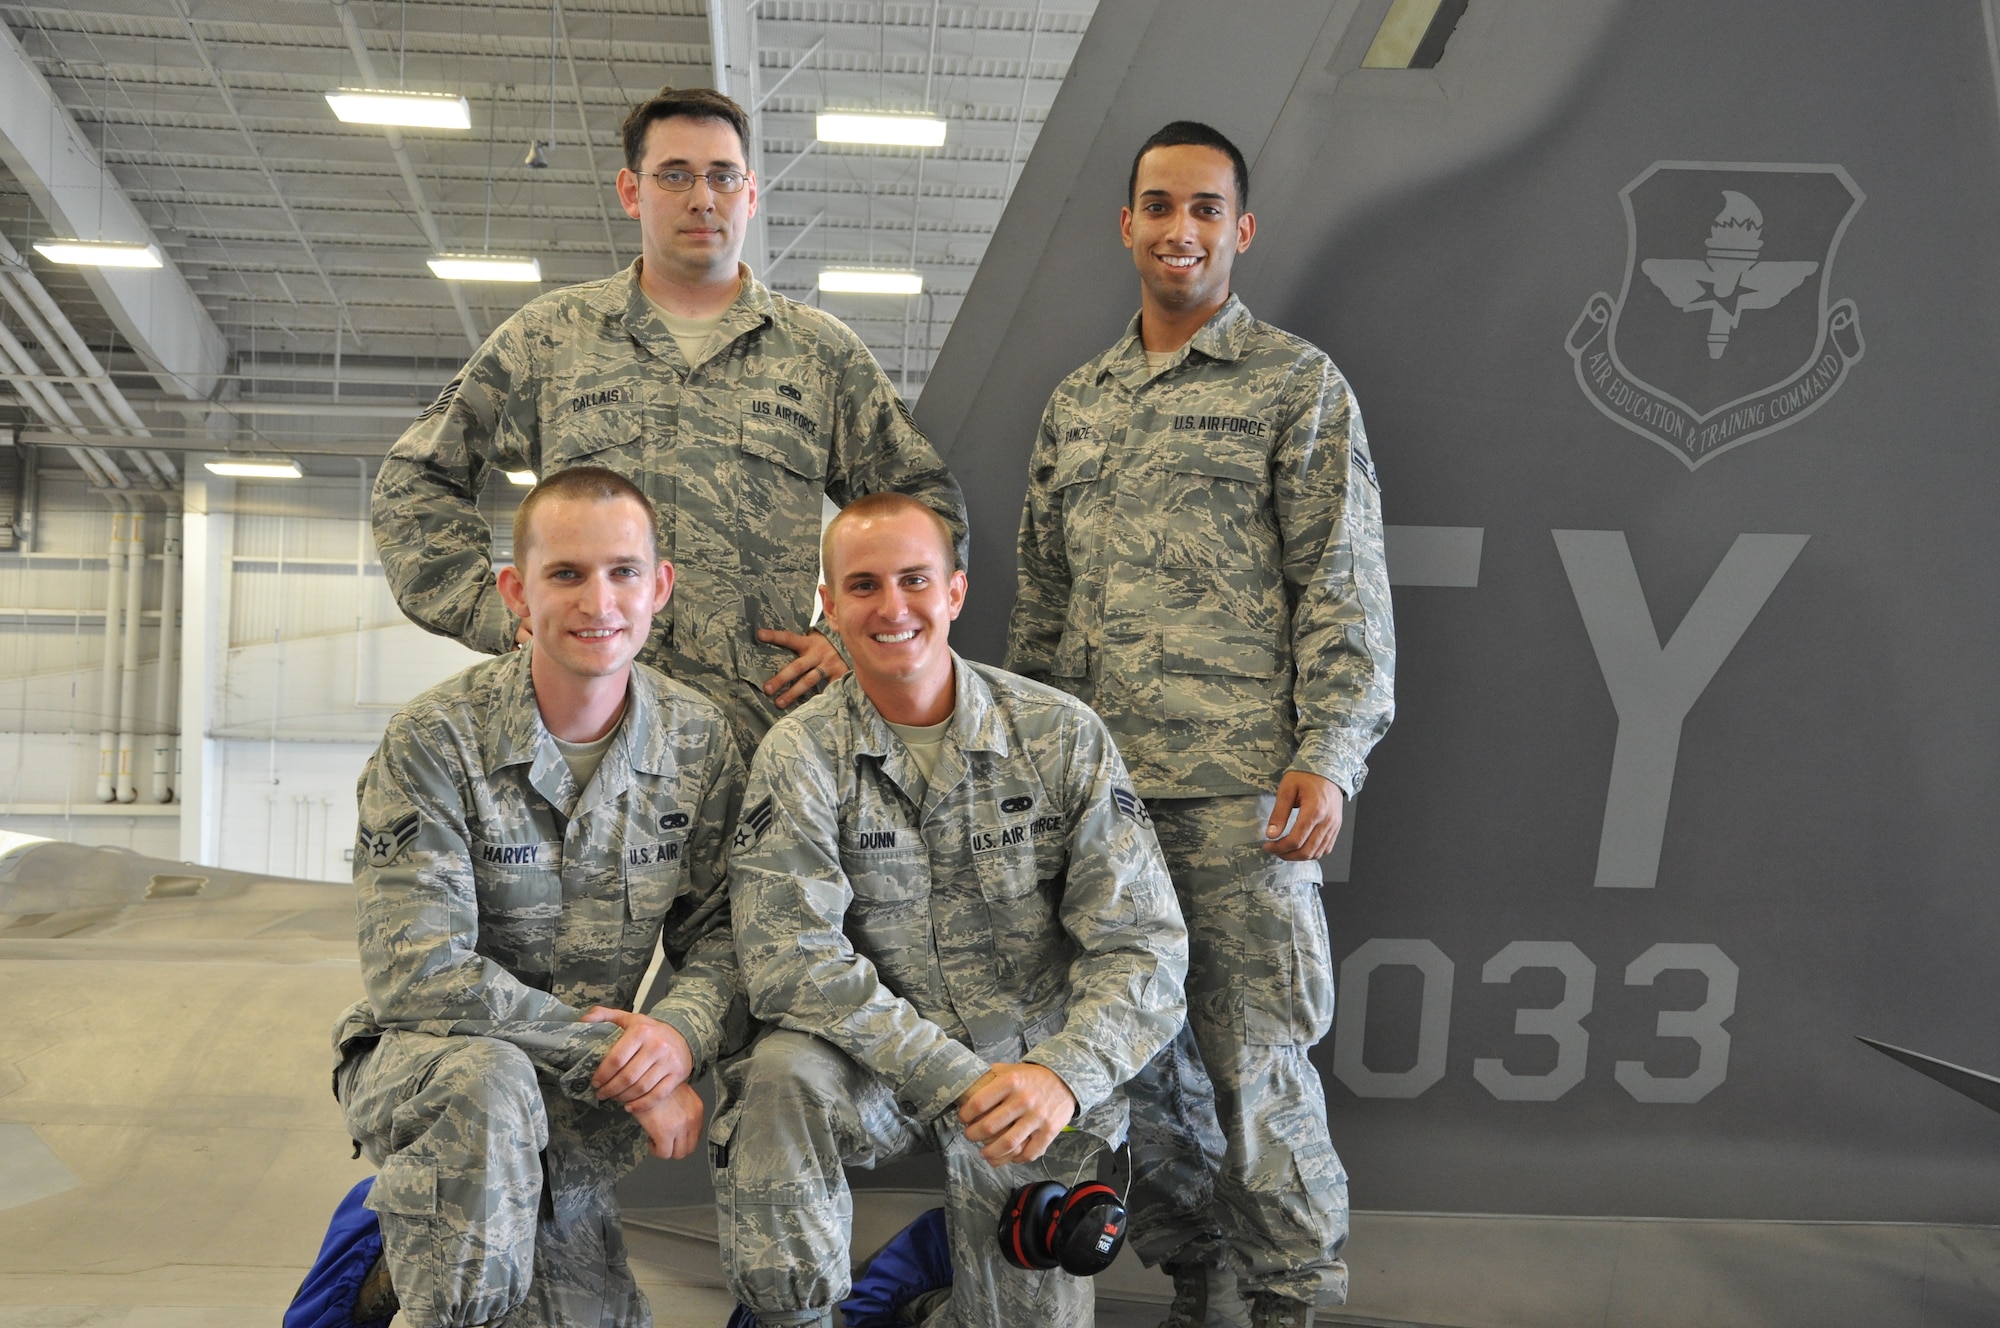 Tech. Sgt. Kraig Callais, 43rd Aircraft Maintenance Unit avionics fleet health manager; Senior Airman Christopher Dunn, 43rd AMU F-22 specialist; Airman 1st Class Kenan Harvey, 43rd AMU F-22 specialist; and Airman 1st Class Daniel Ramize, 43rd AMU F-22 specialist, pose on top of an F-22 Raptor that they are currently working on inside the hangar of the 43rd AMU at Tyndall Air Force Base, Fla. This is part of the Avionics Health of the Fleet program, which was implemented to increase the number of fully mission capable F-22s on Tyndall’s flight line. (U.S. Air Force photo by Airman 1st Class Alex Echols)